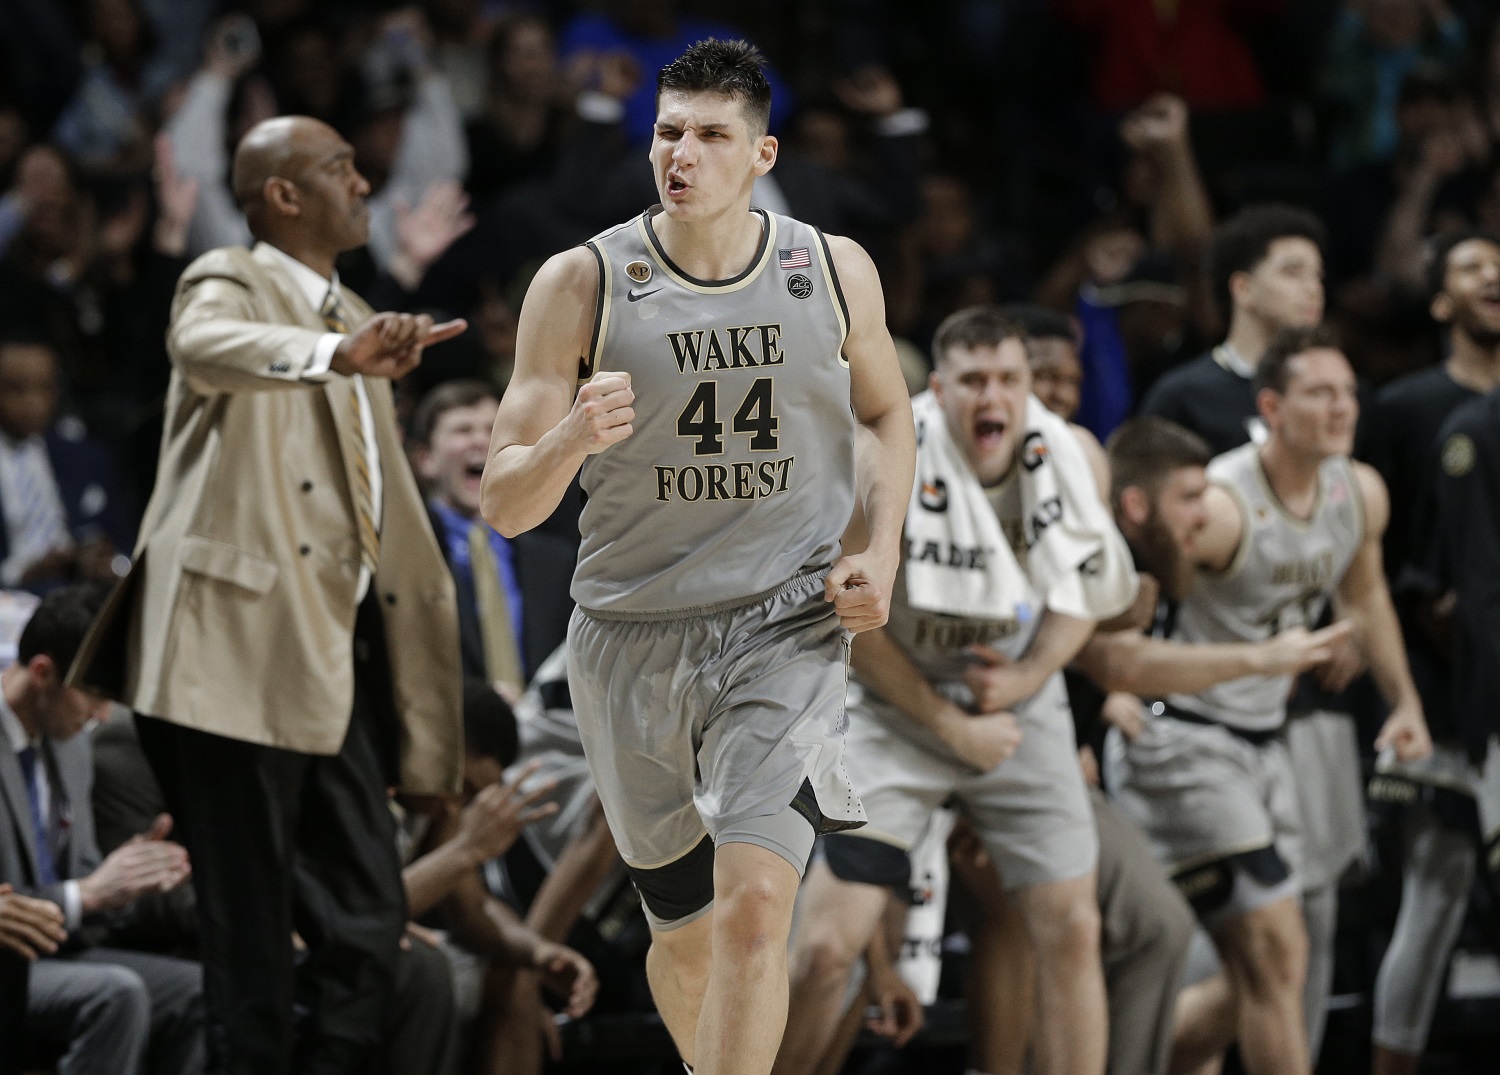 Wake Forest's Konstantinos Mitoglou (44) celebrates after a basket against Louisville during the second half of an NCAA college basketball game in Winston-Salem, N.C., Wednesday, March 1, 2017. Wake Forest won 88-81. (AP Photo/Chuck Burton)